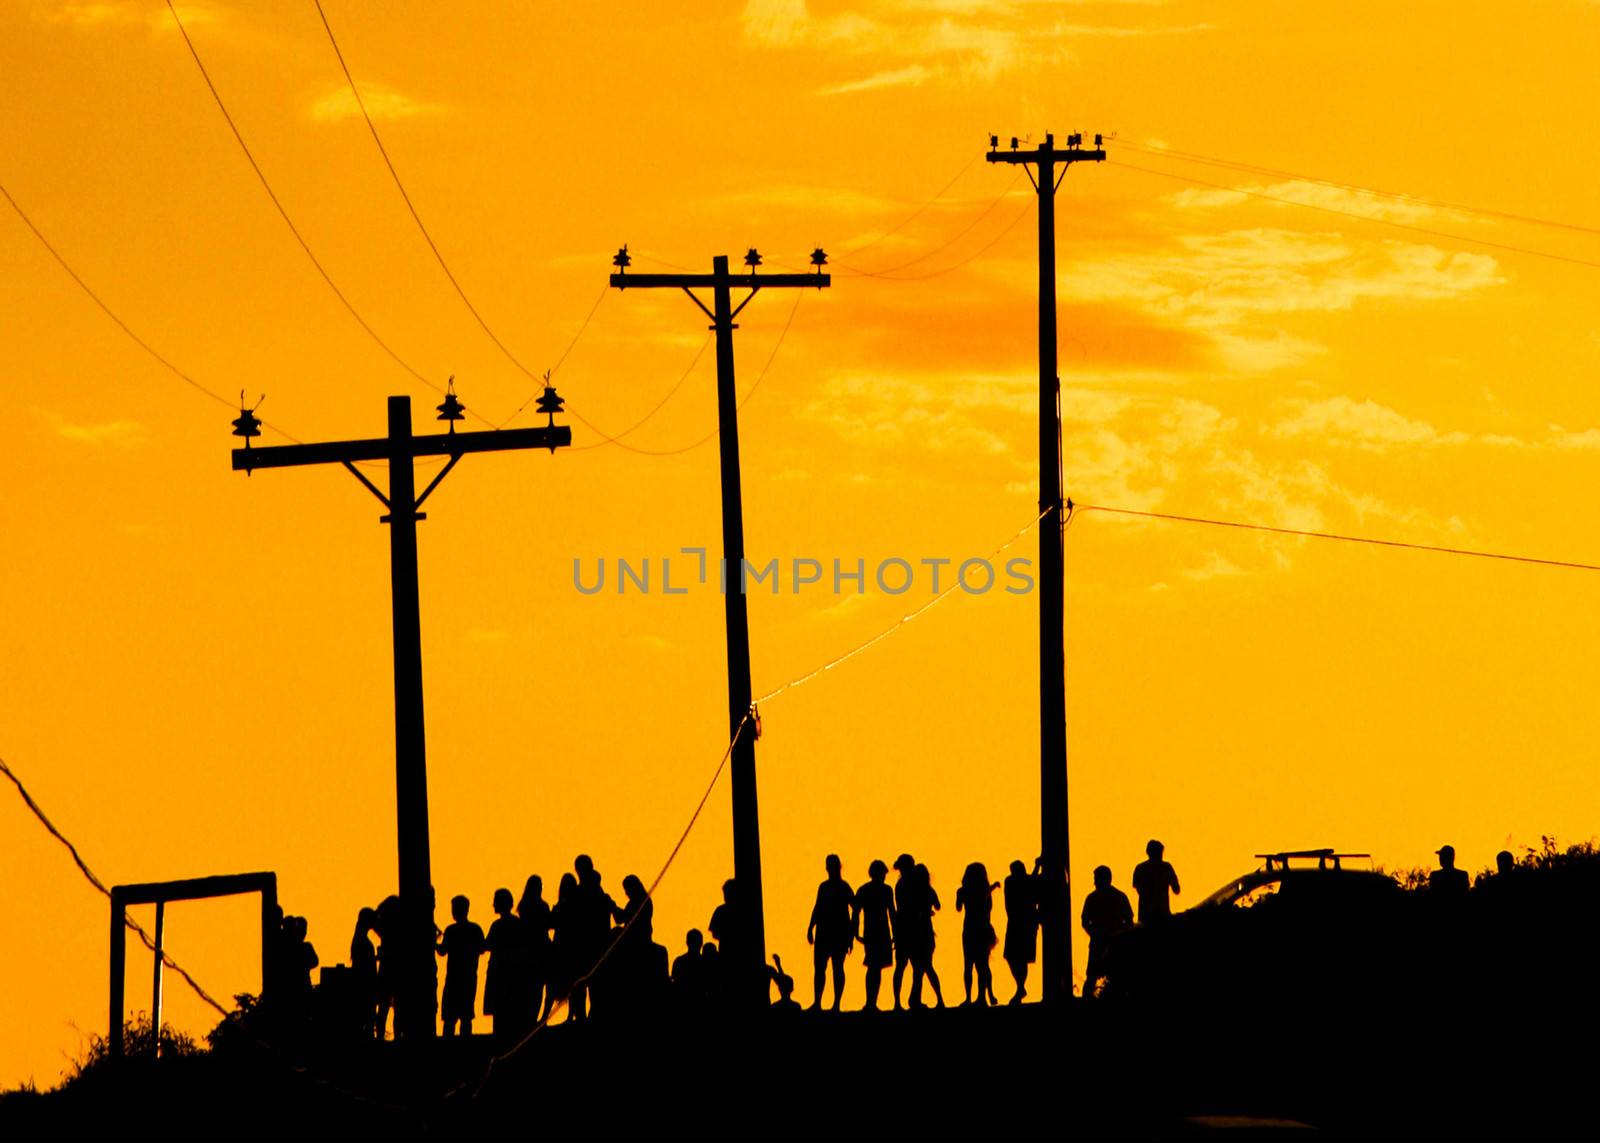 The silhouette of a bunch of people waiting for the sunset at the Pontal do Atalaia in Arraial do Cabo, Rio de Janeiro, Brazil.